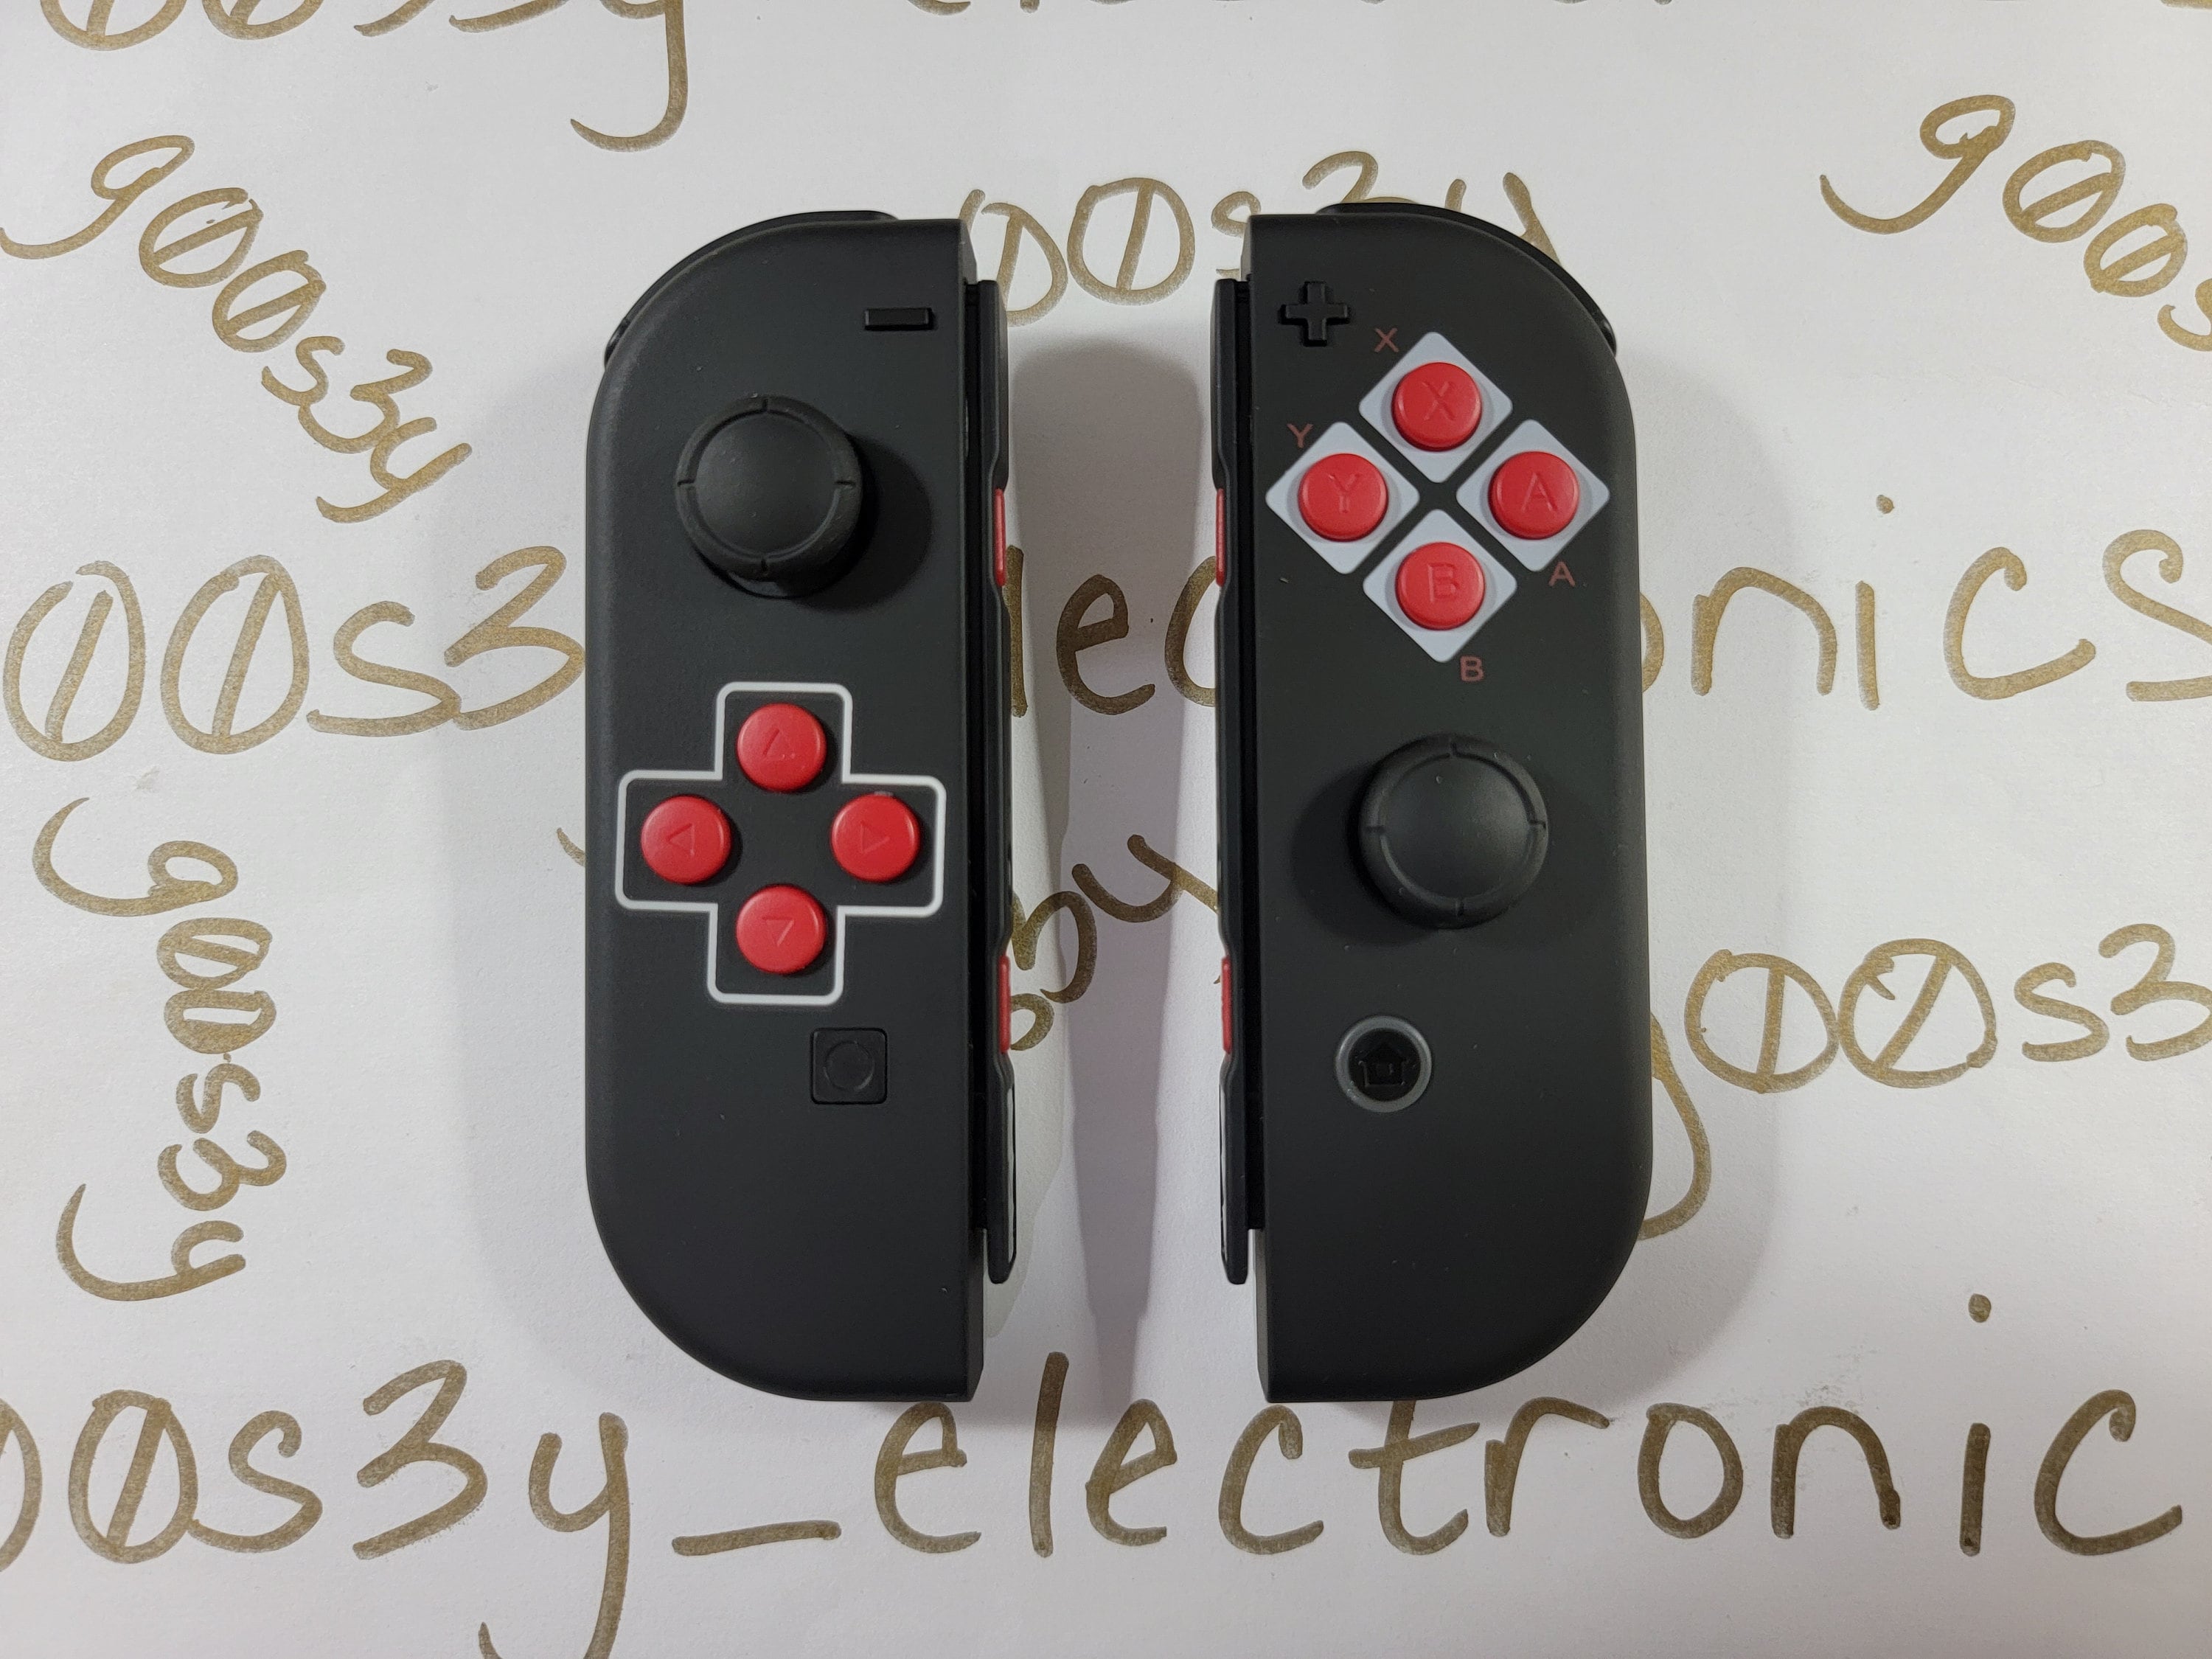 NES-Style Switch Joy-Cons Look Sick, But Will Set You Back $200 - GameSpot